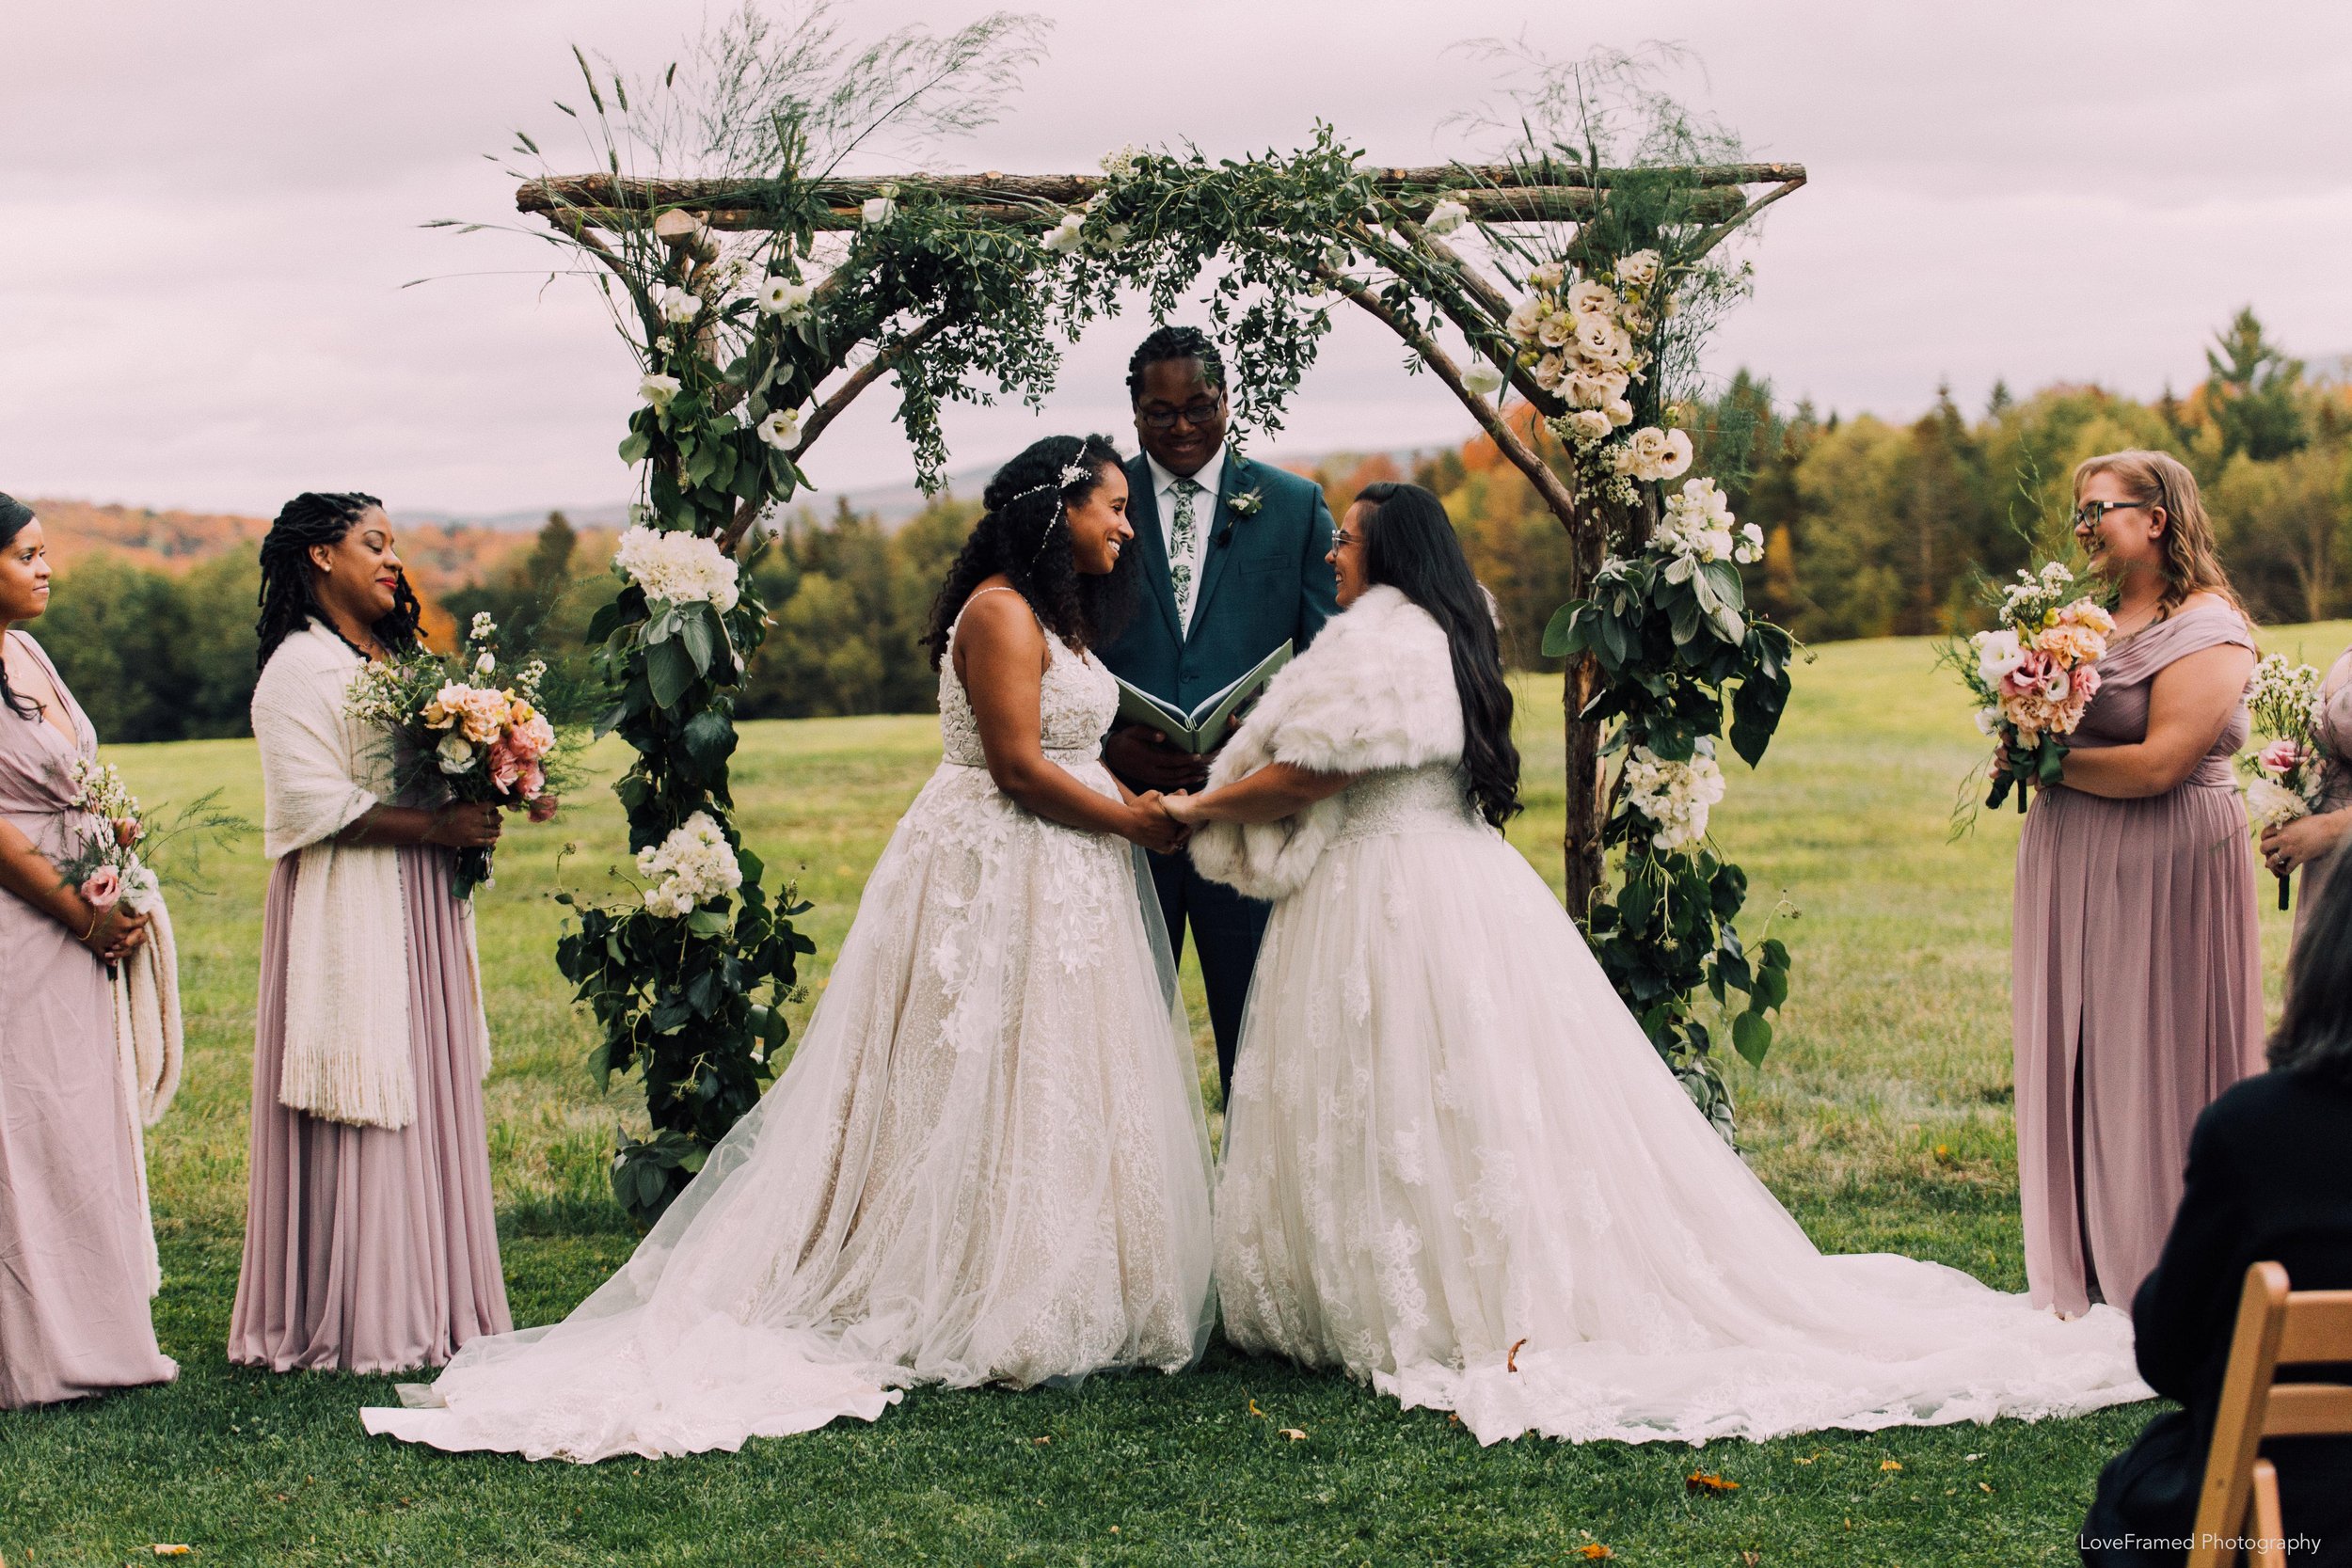 An outdoor wedding ceremony at Turning Stone Farm